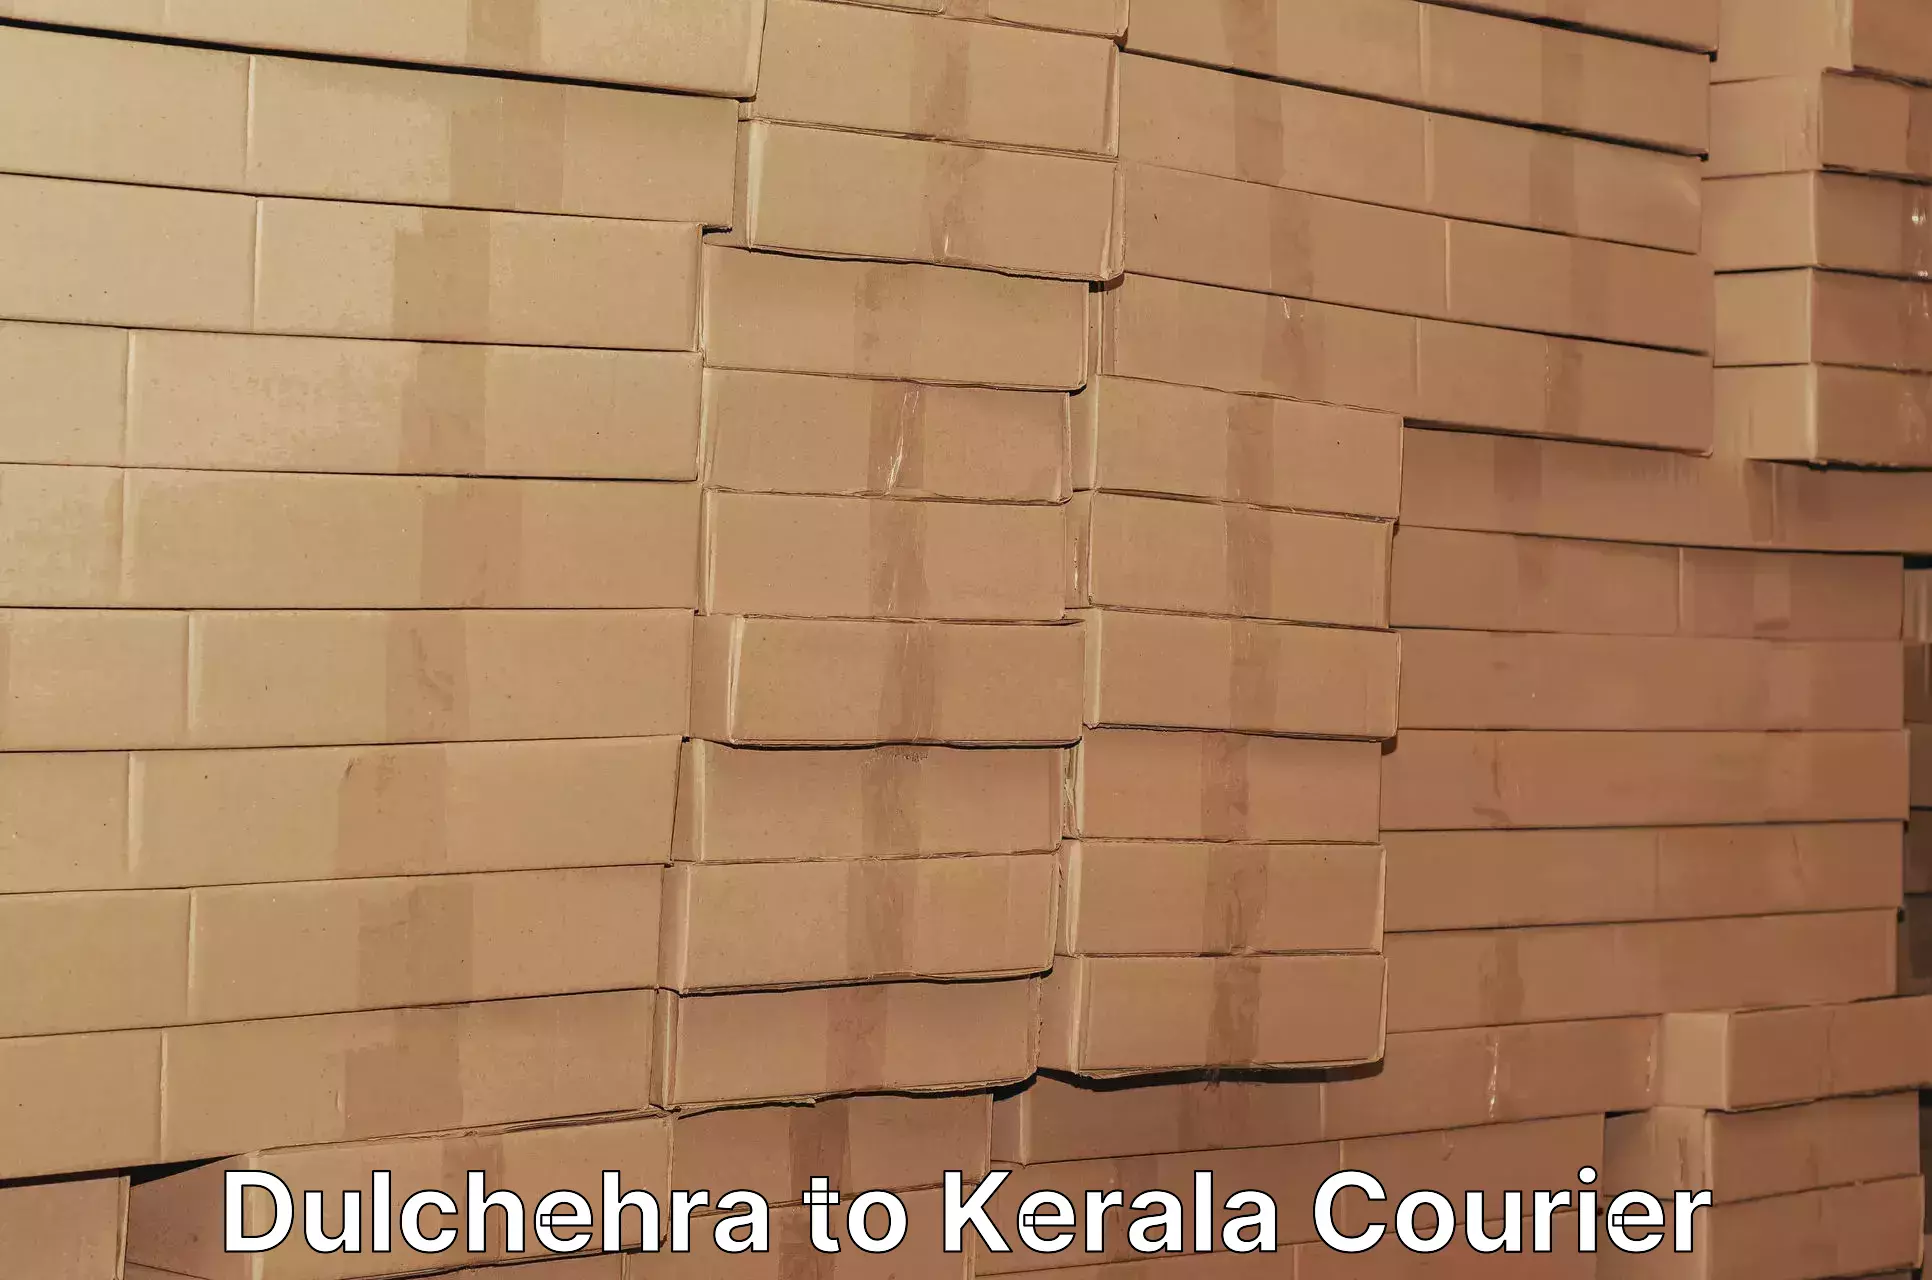 Holiday shipping services Dulchehra to Kerala